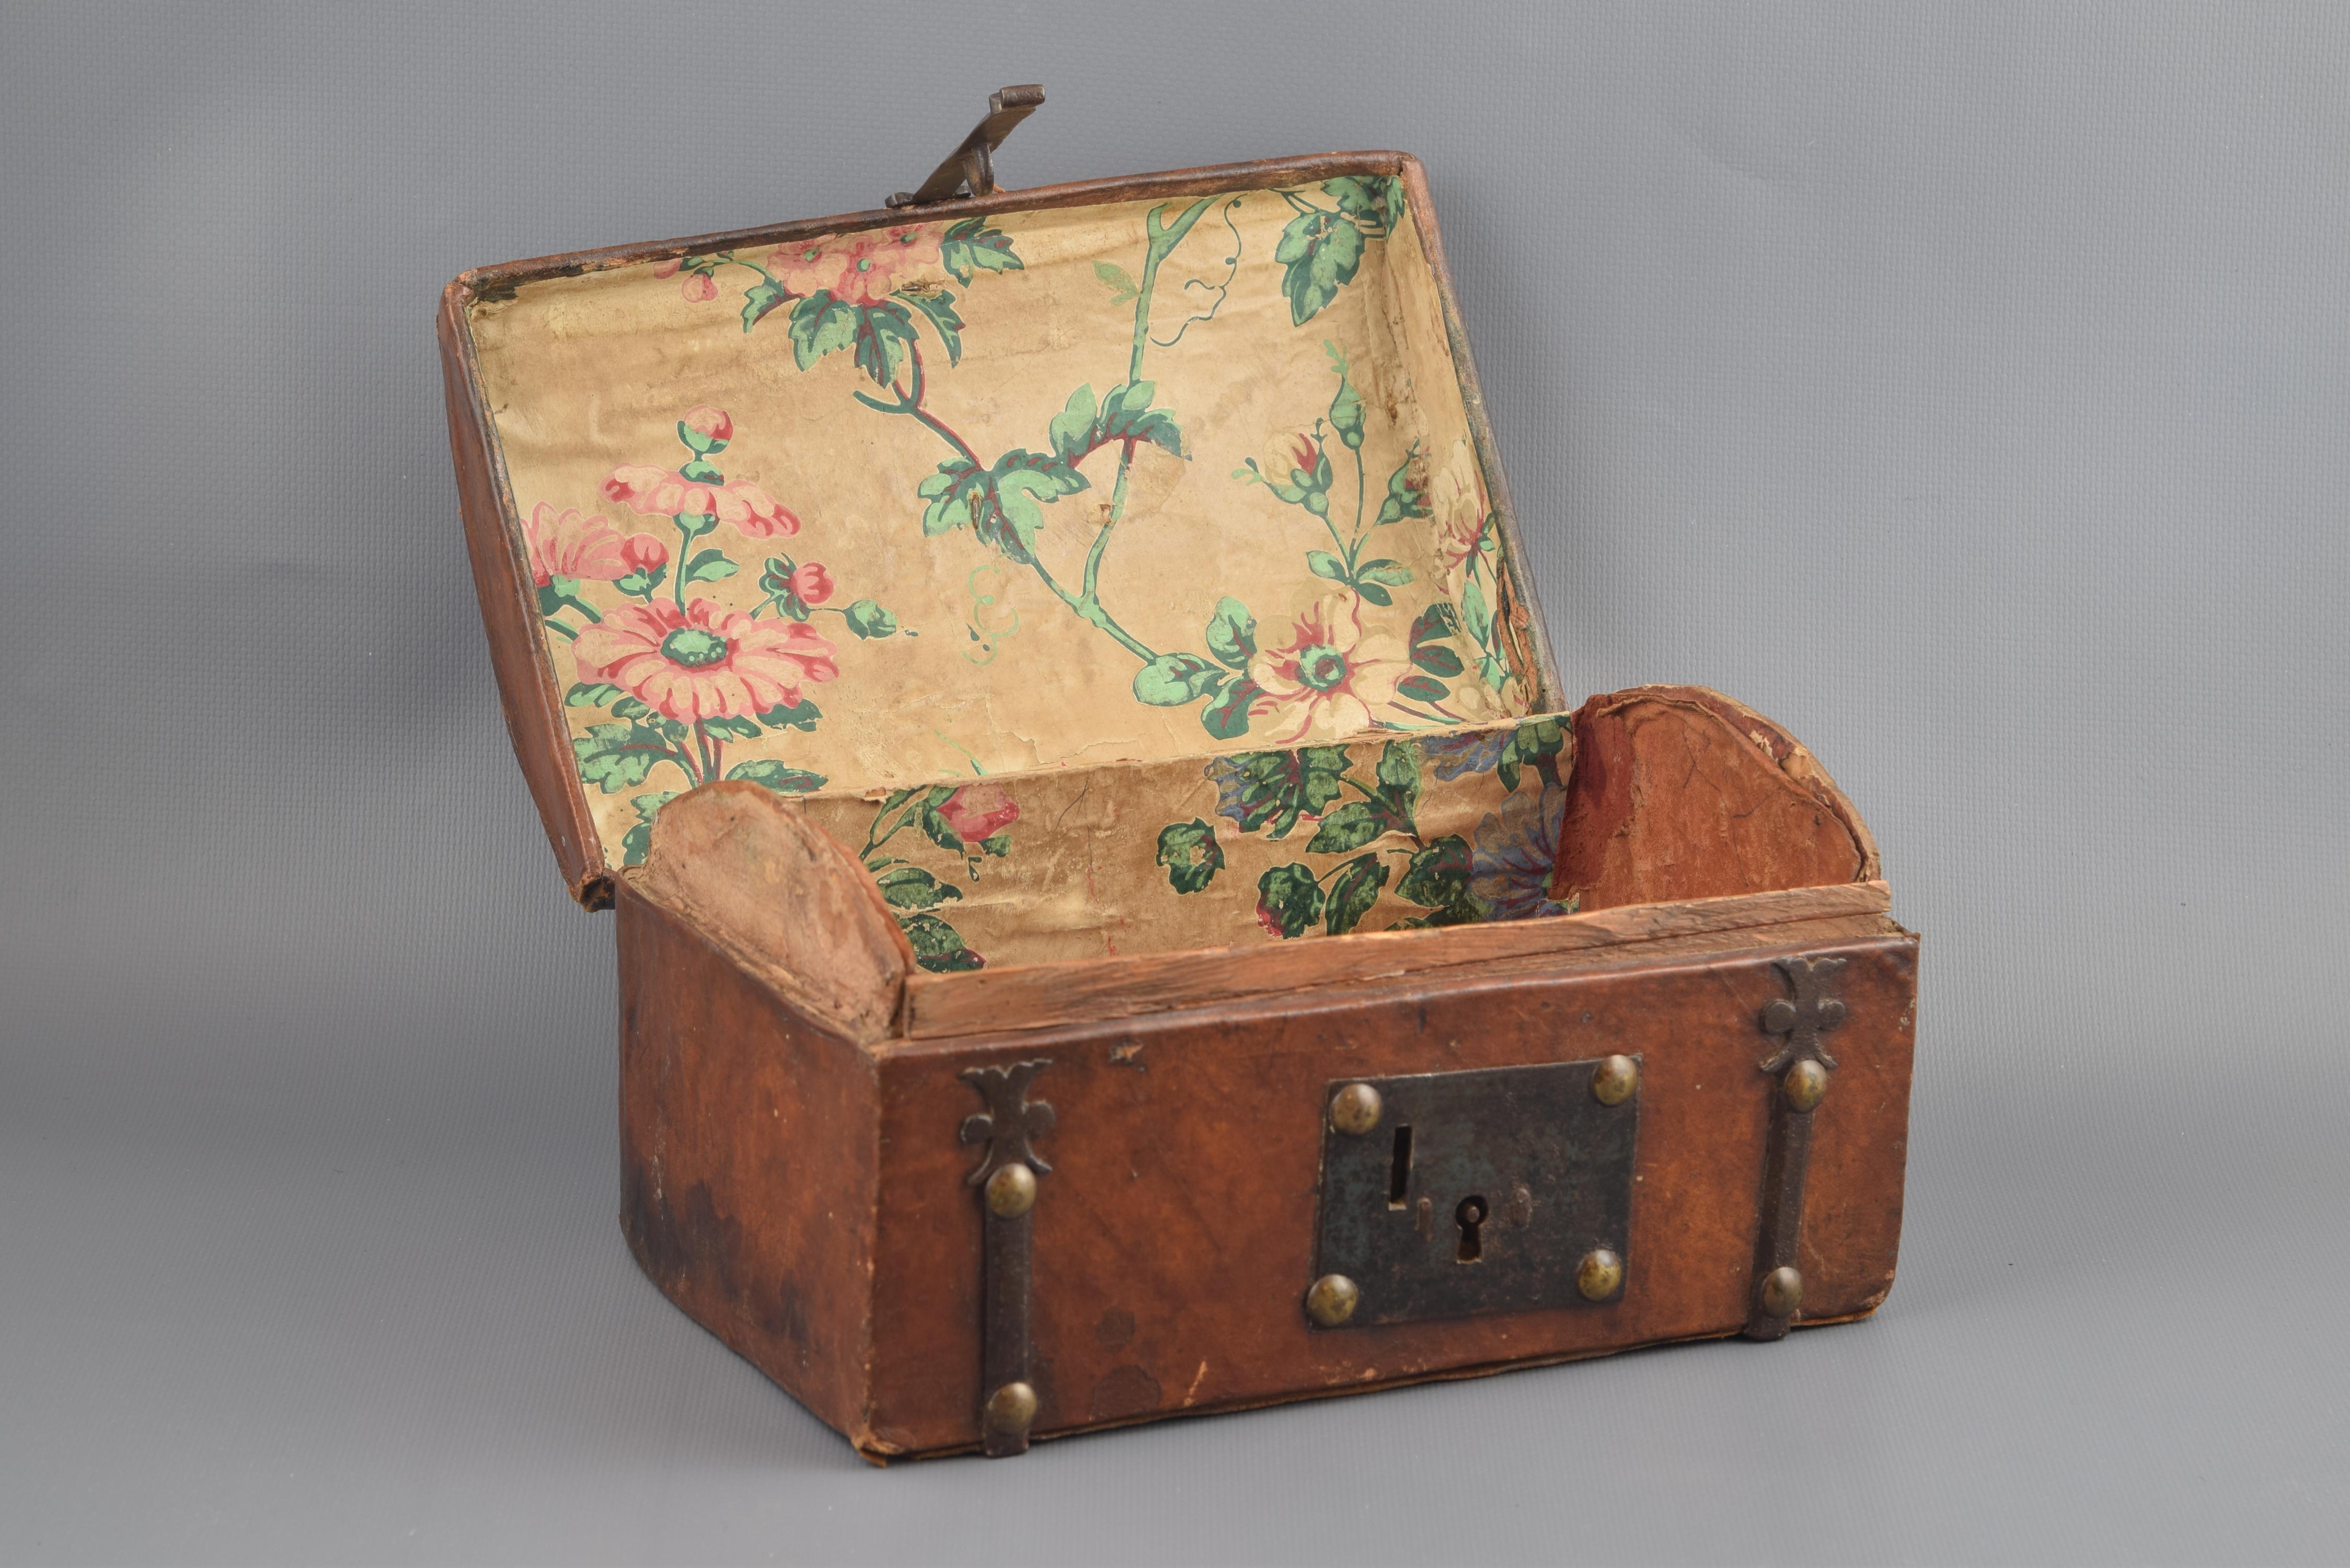 Wooden Chest, Leather and Metal, 17th Century im Zustand „Relativ gut“ in Madrid, ES